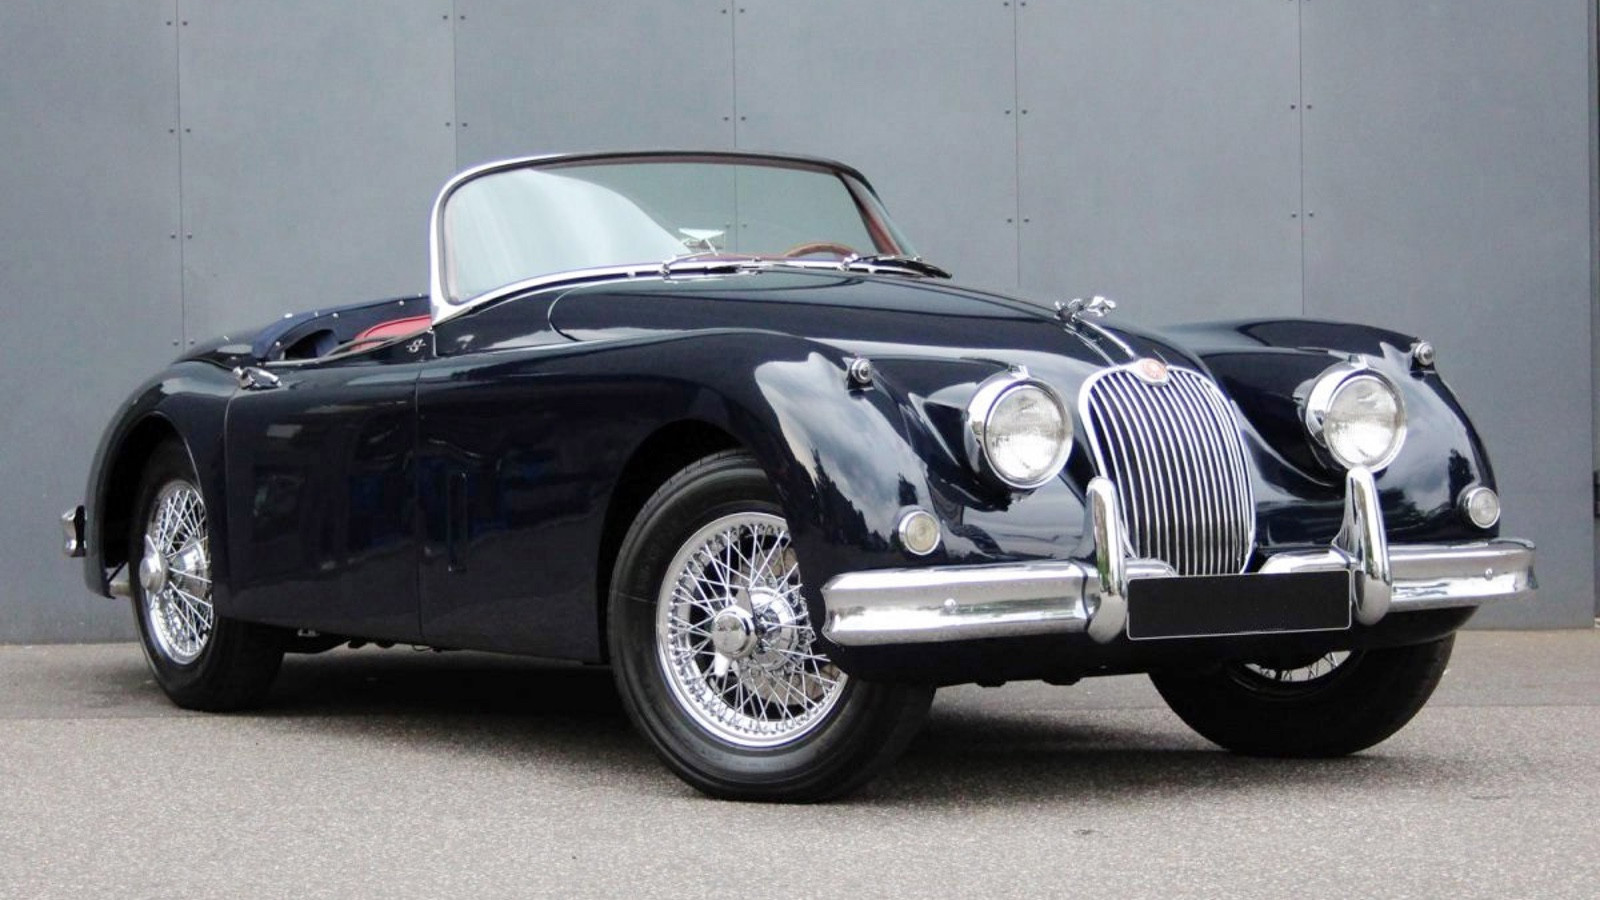 20 great cars up for grabs at Coys’ Monaco auction